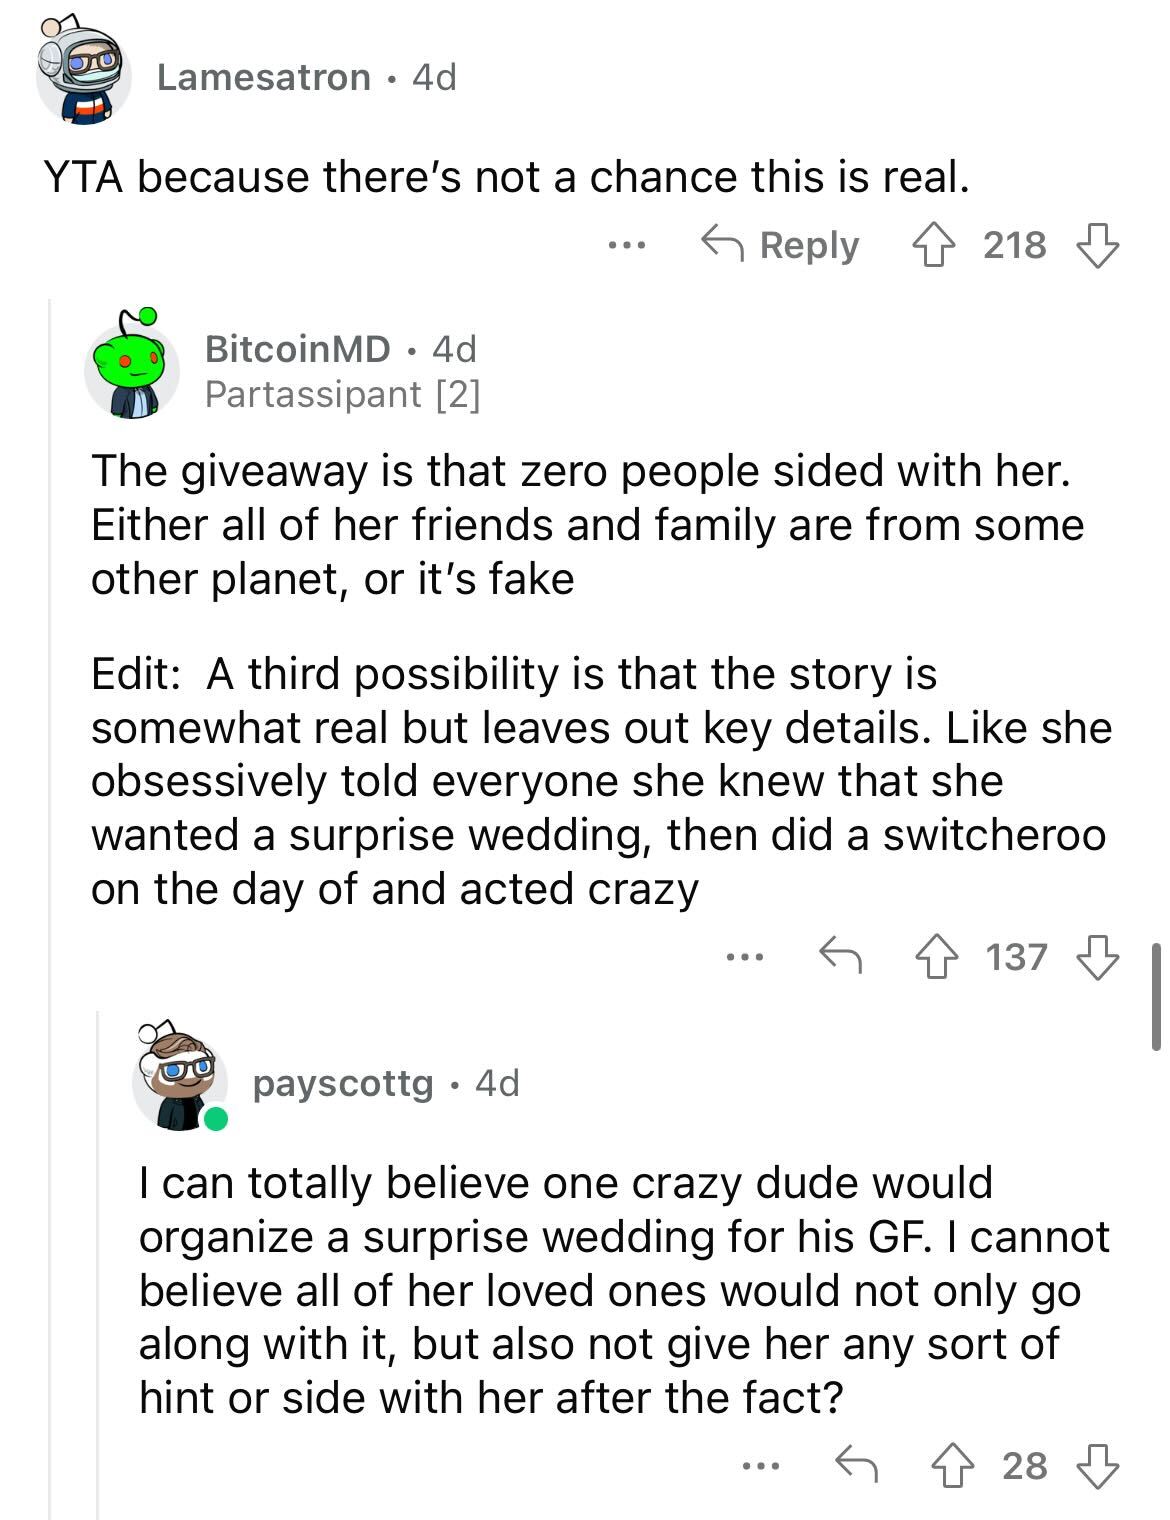 am i the asshole thread on reddit - document - Oo Lamesatron 4d Yta because there's not a chance this is real. 218 BitcoinMD. 4d Partassipant 2 The giveaway is that zero people sided with her. Either all of her friends and family are from some other plane